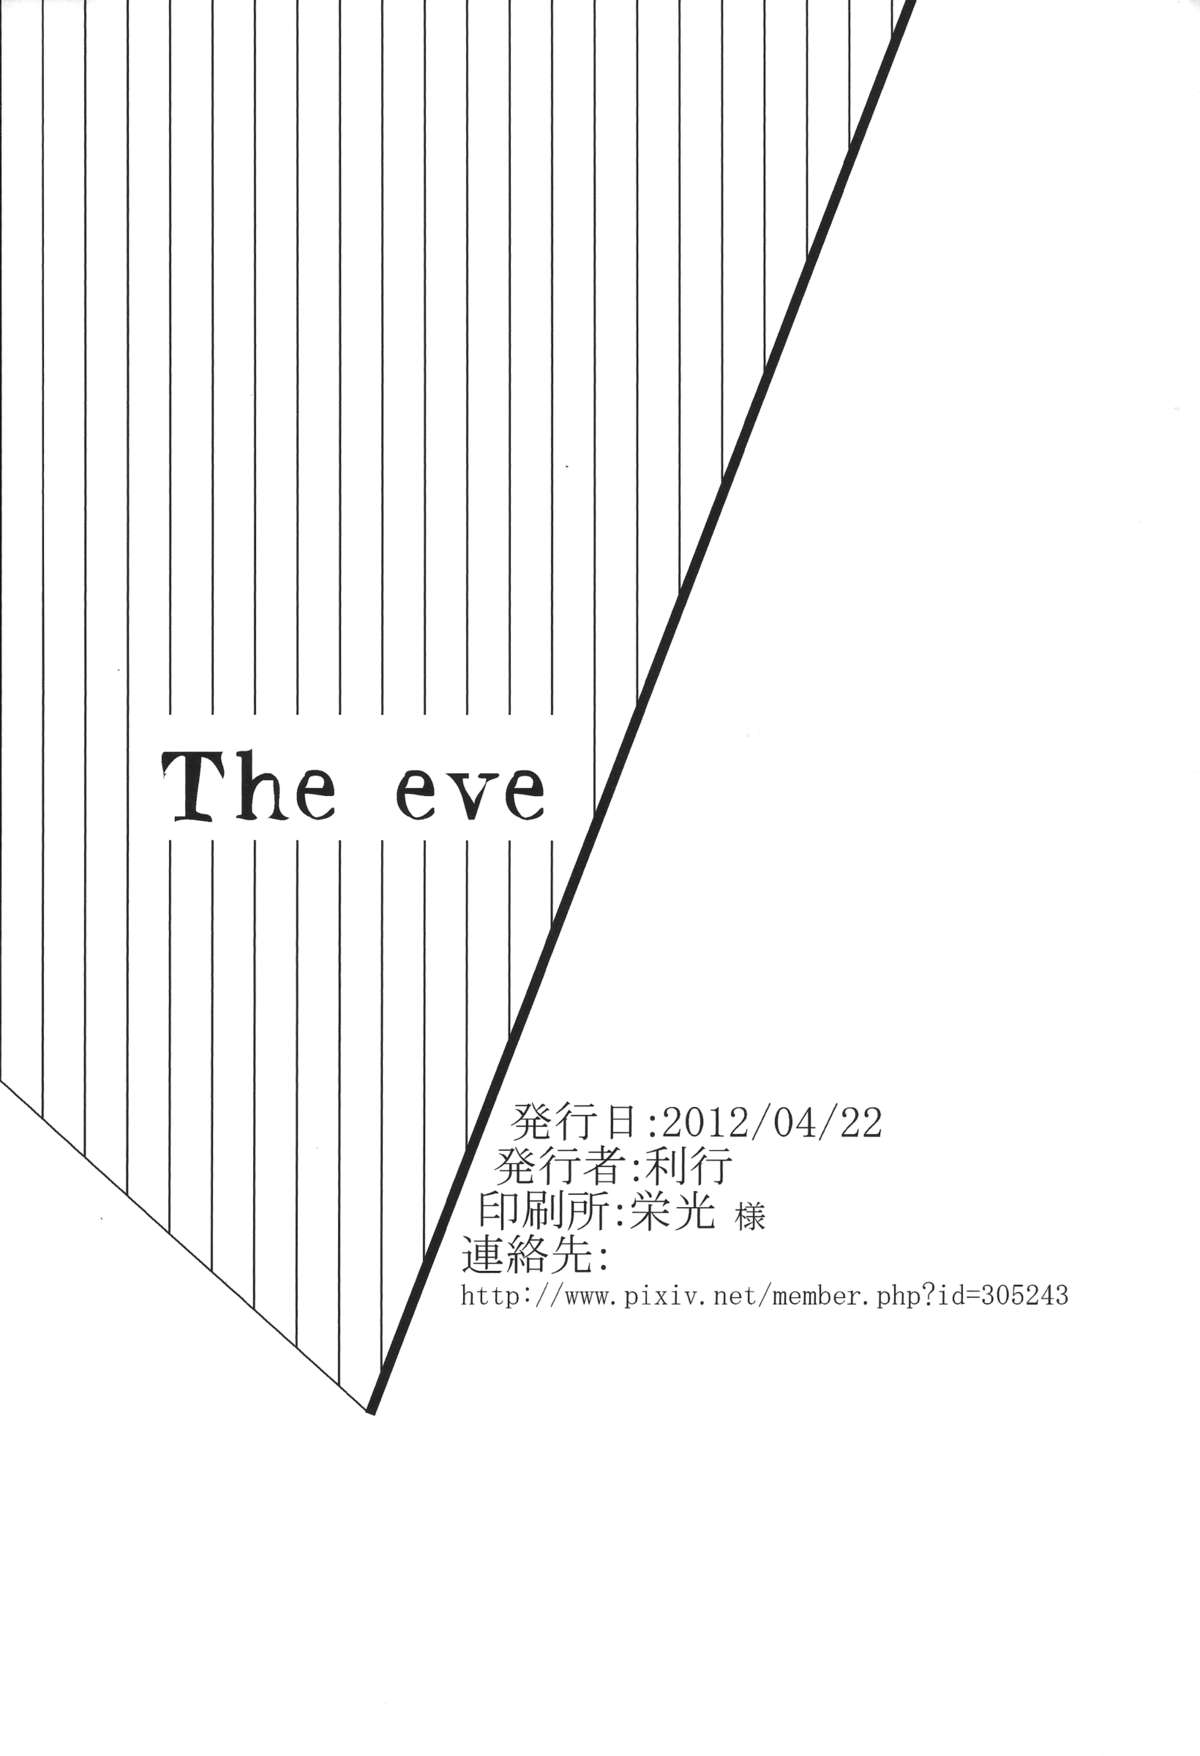 The eve